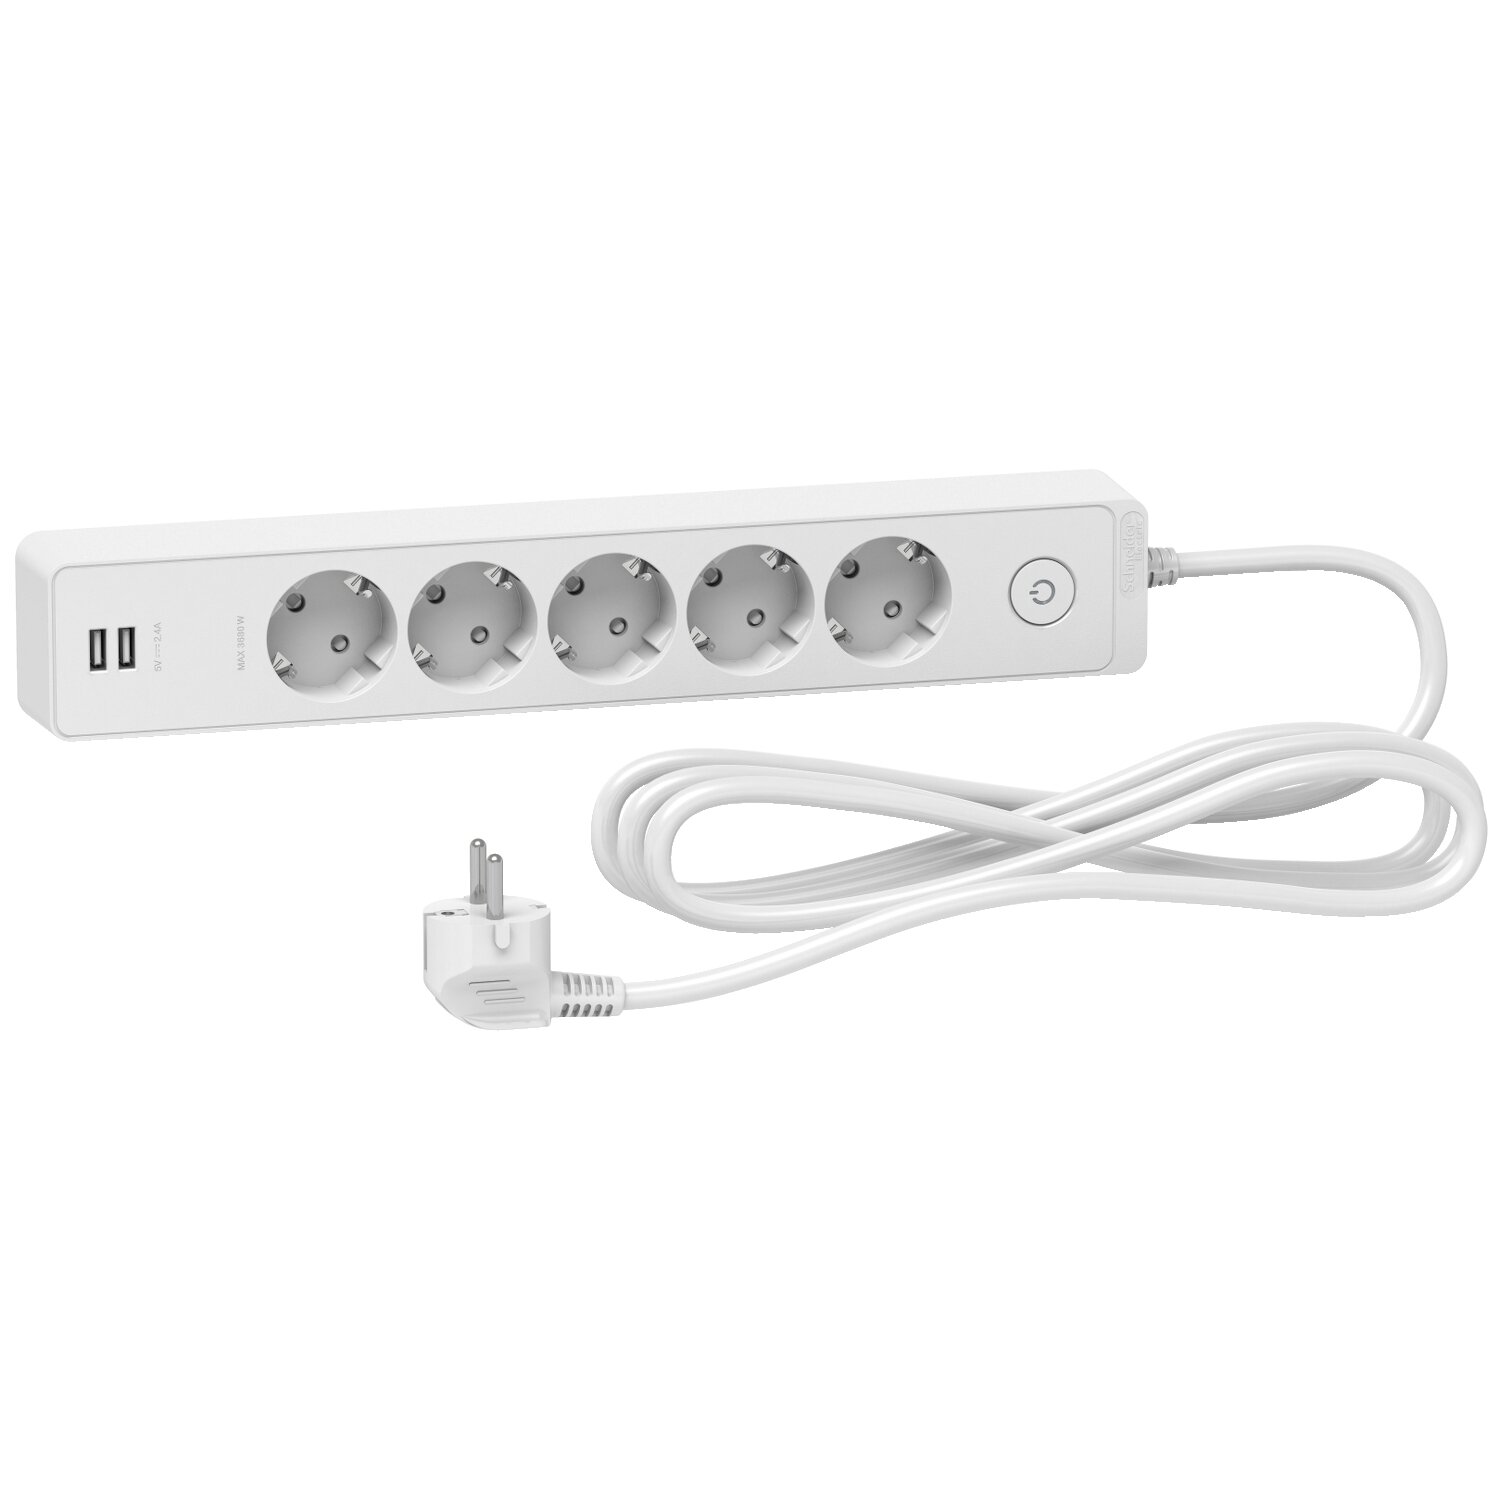 Unica extend - Schuko trailing lead - 5 gangs - with USB port - white, 3m